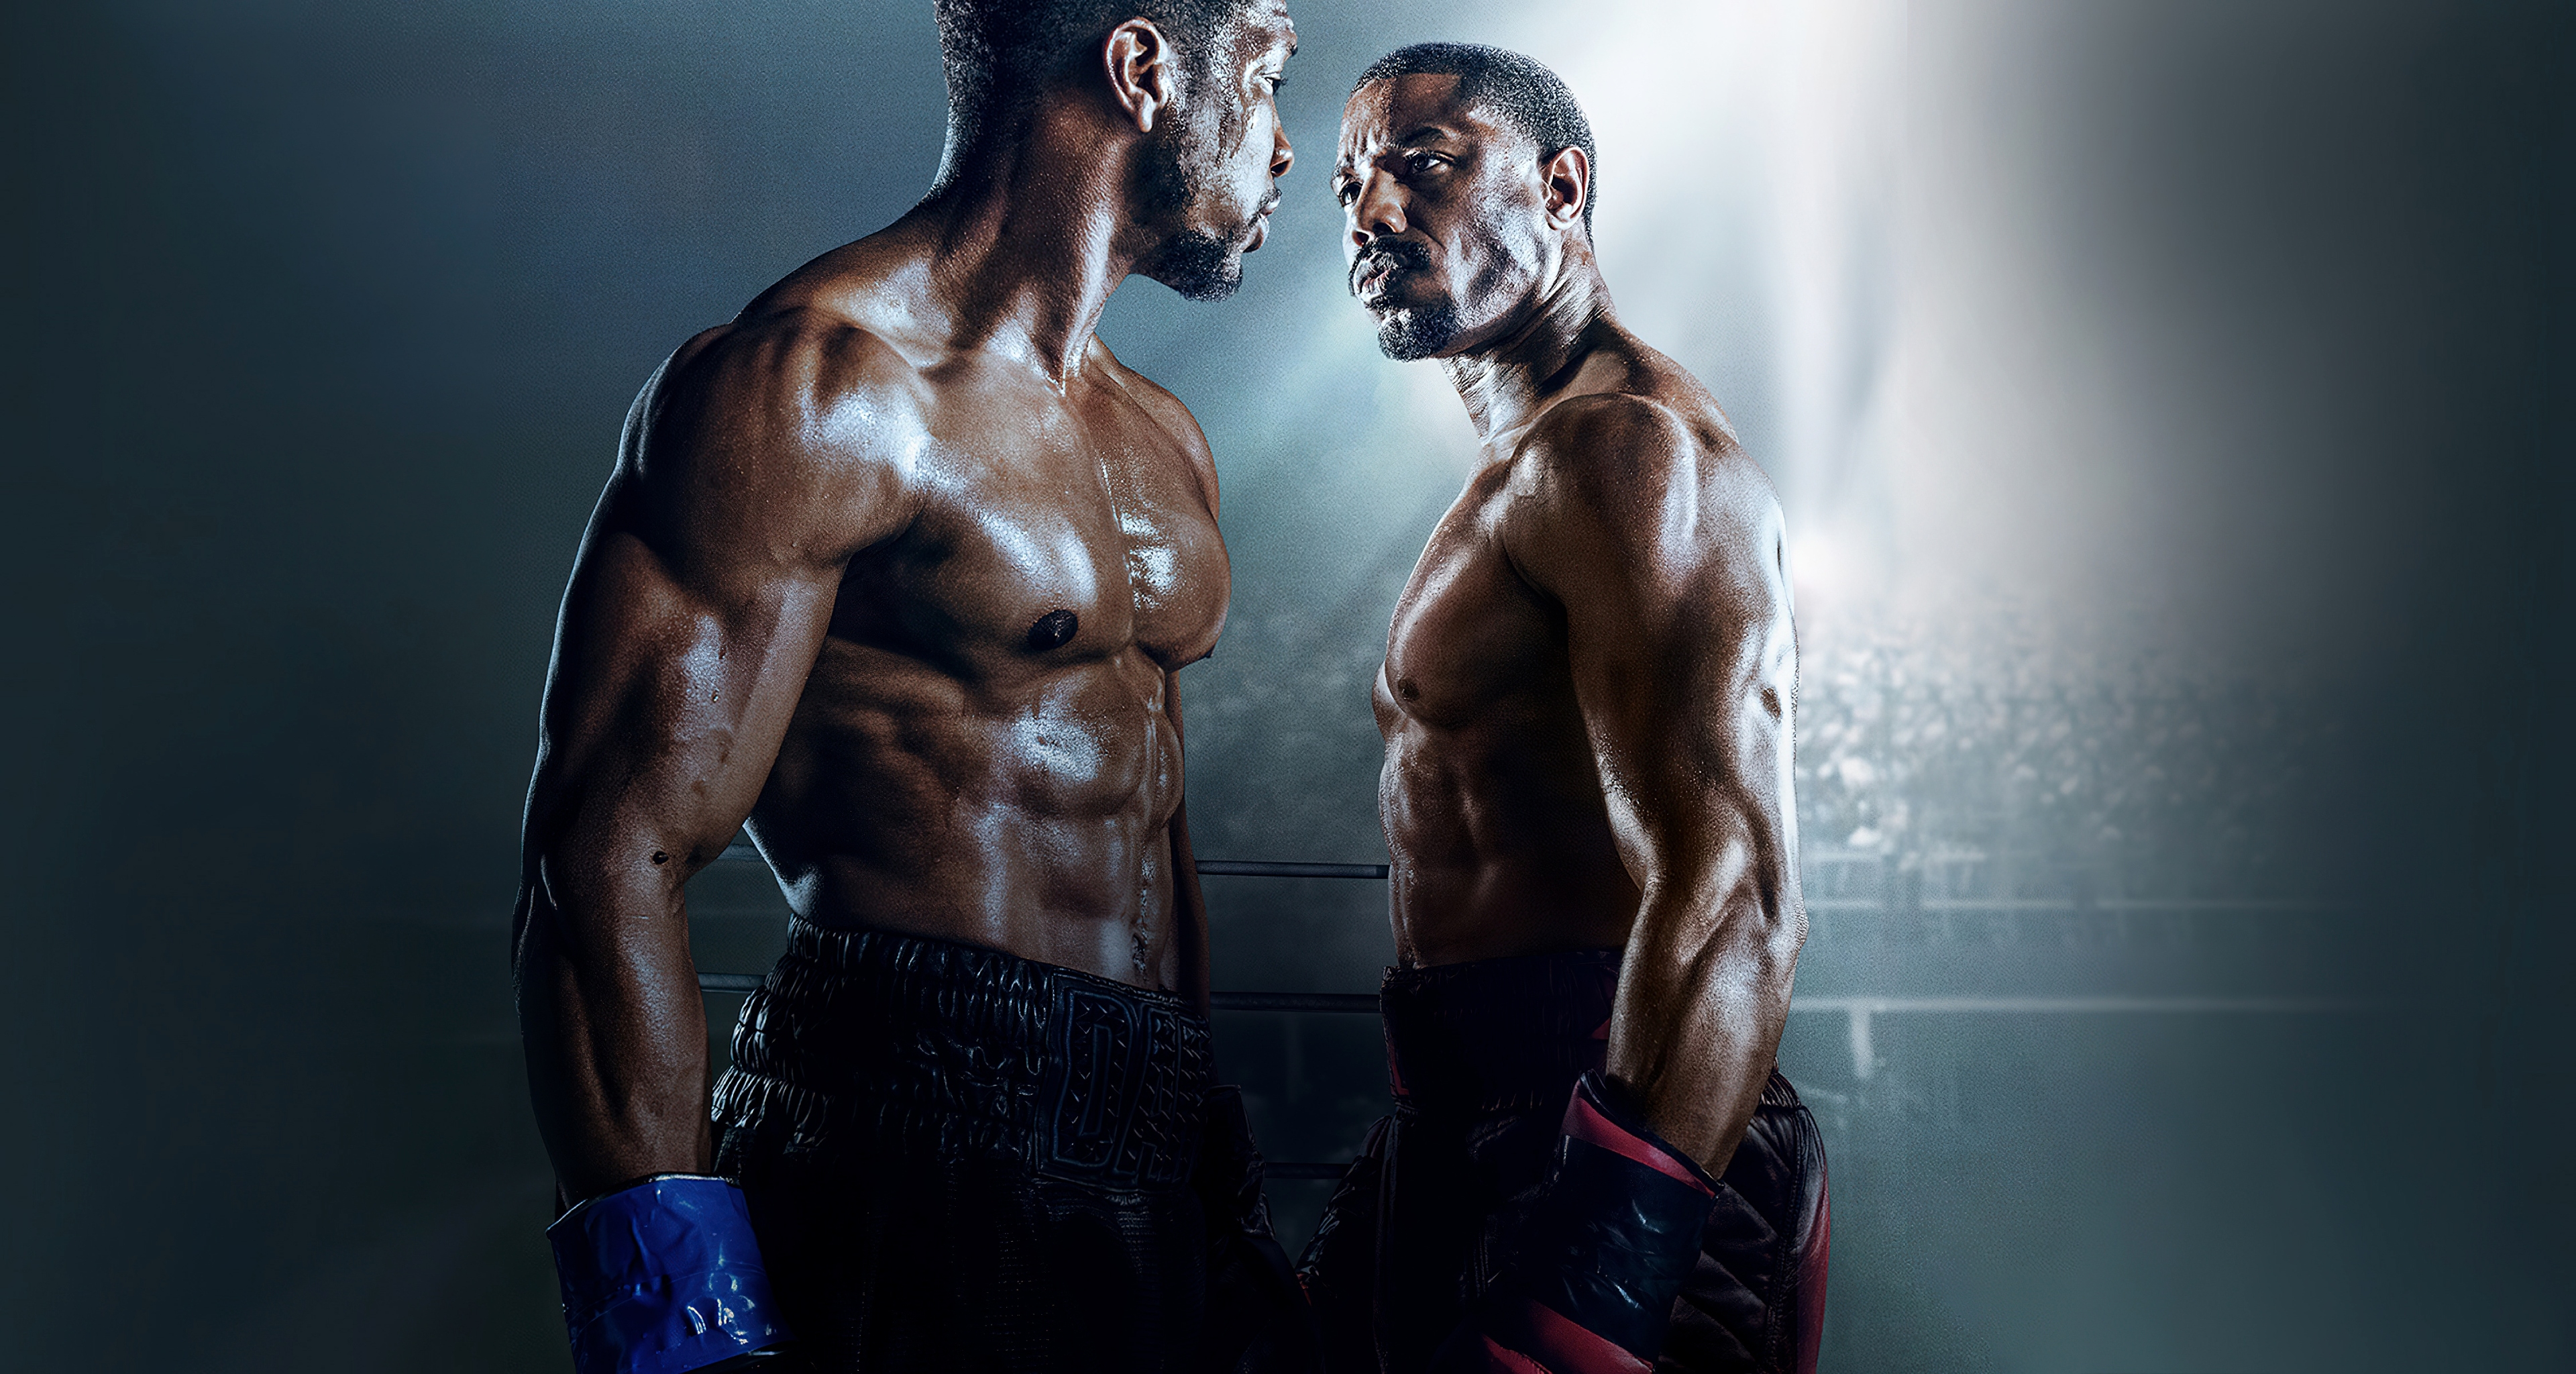 10 Best Adonis Creed wallpapers for iPhone in 2023  iGeeksBlog